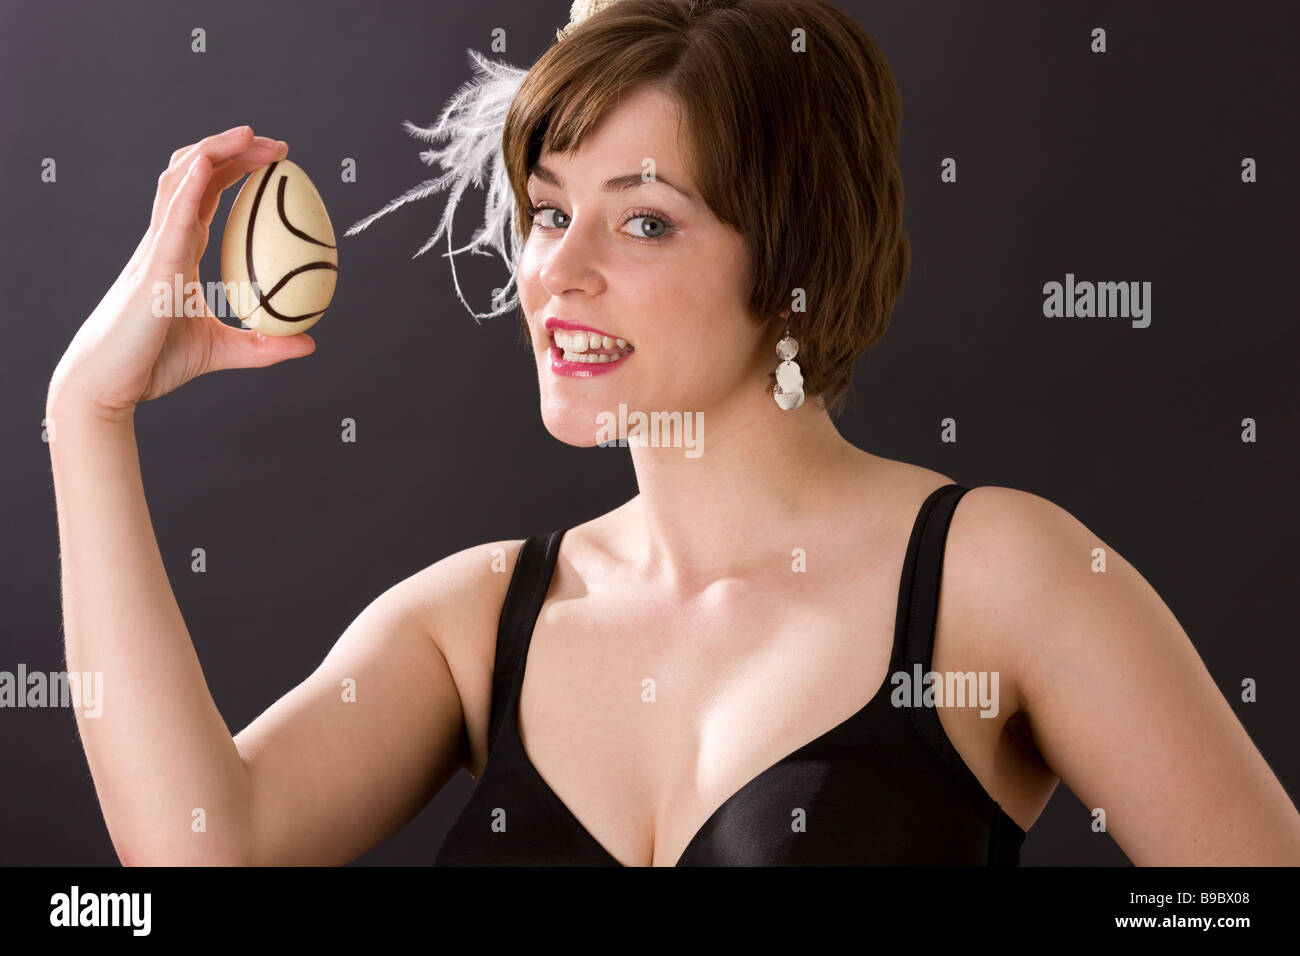 Girl in bra holding easter egg and smiling Banque D'Images